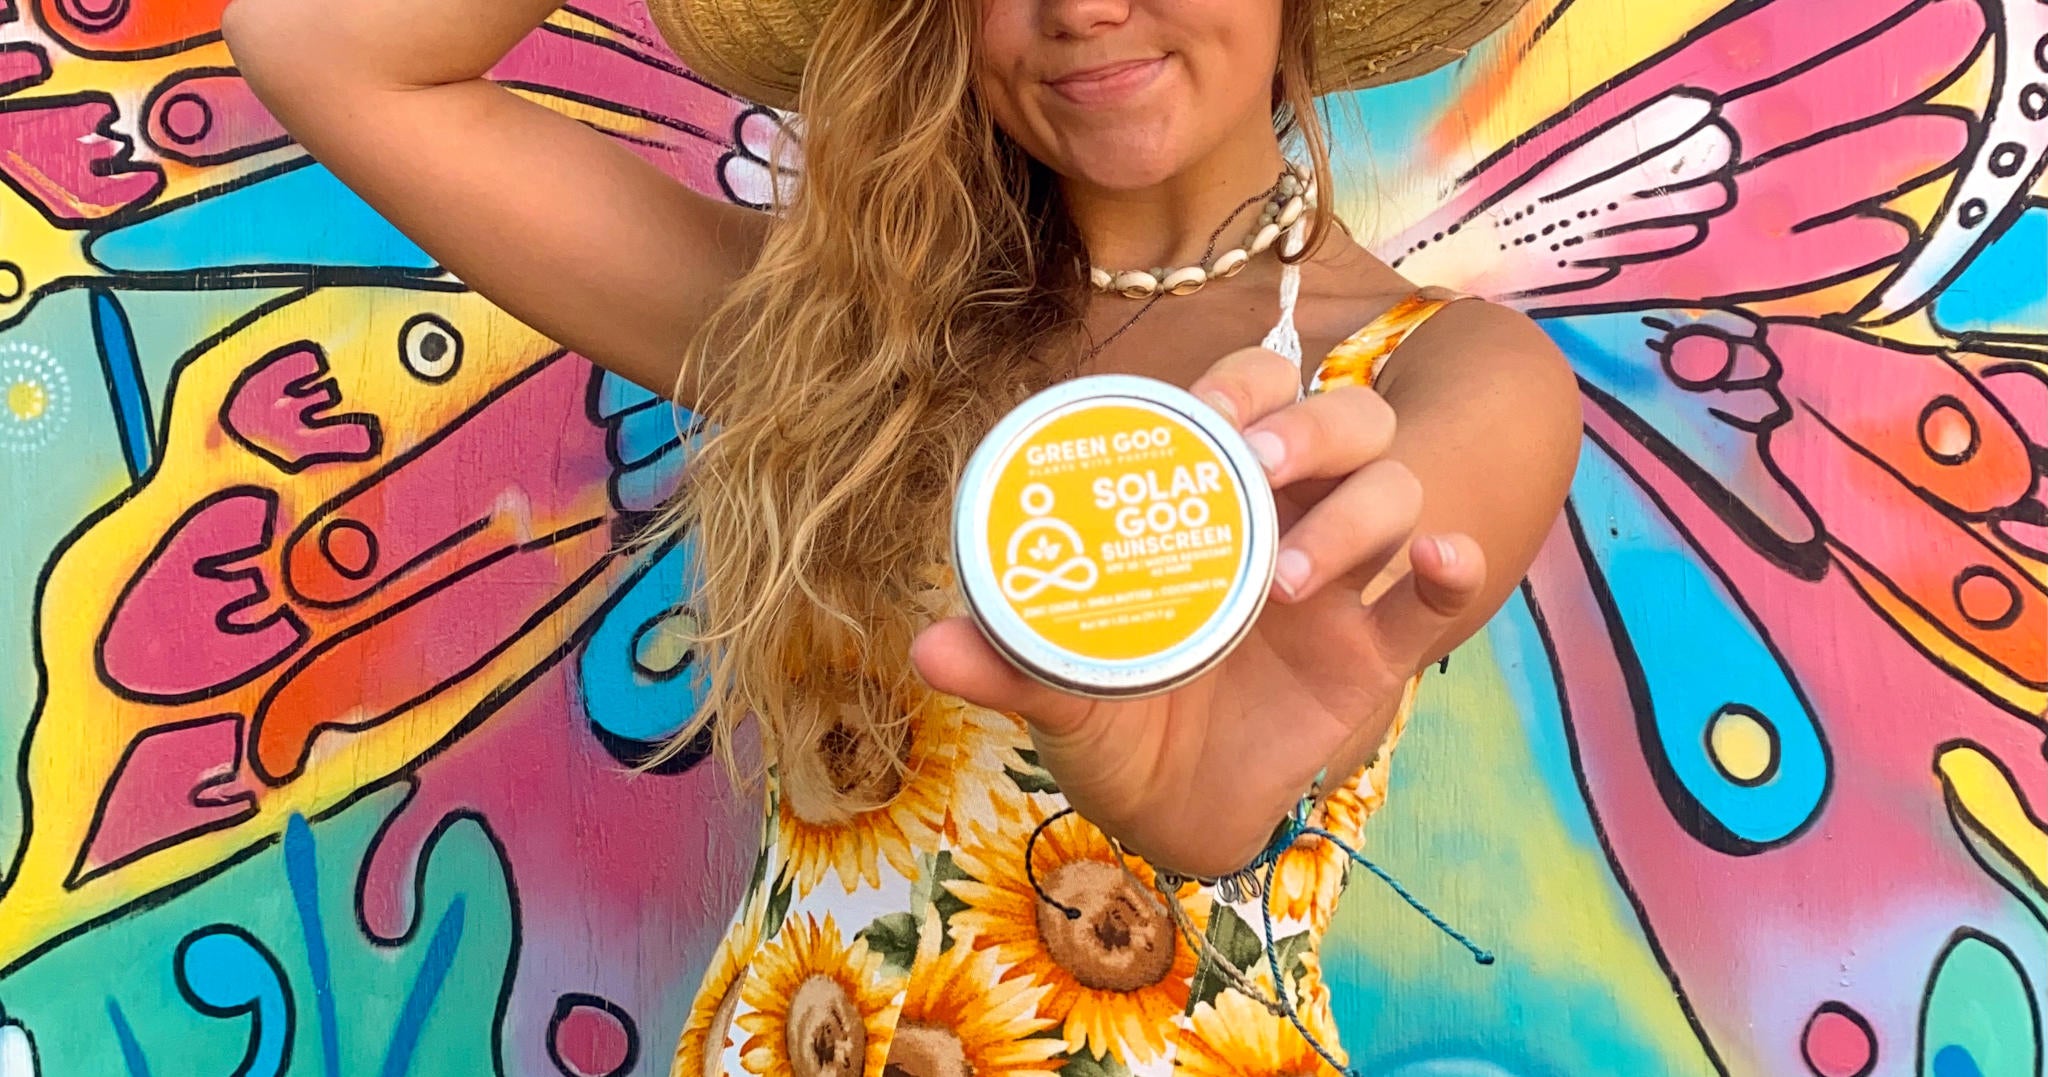 Green Goo's Solar Goo SPF30 Sunscreen large tin held by a young blonde female creator